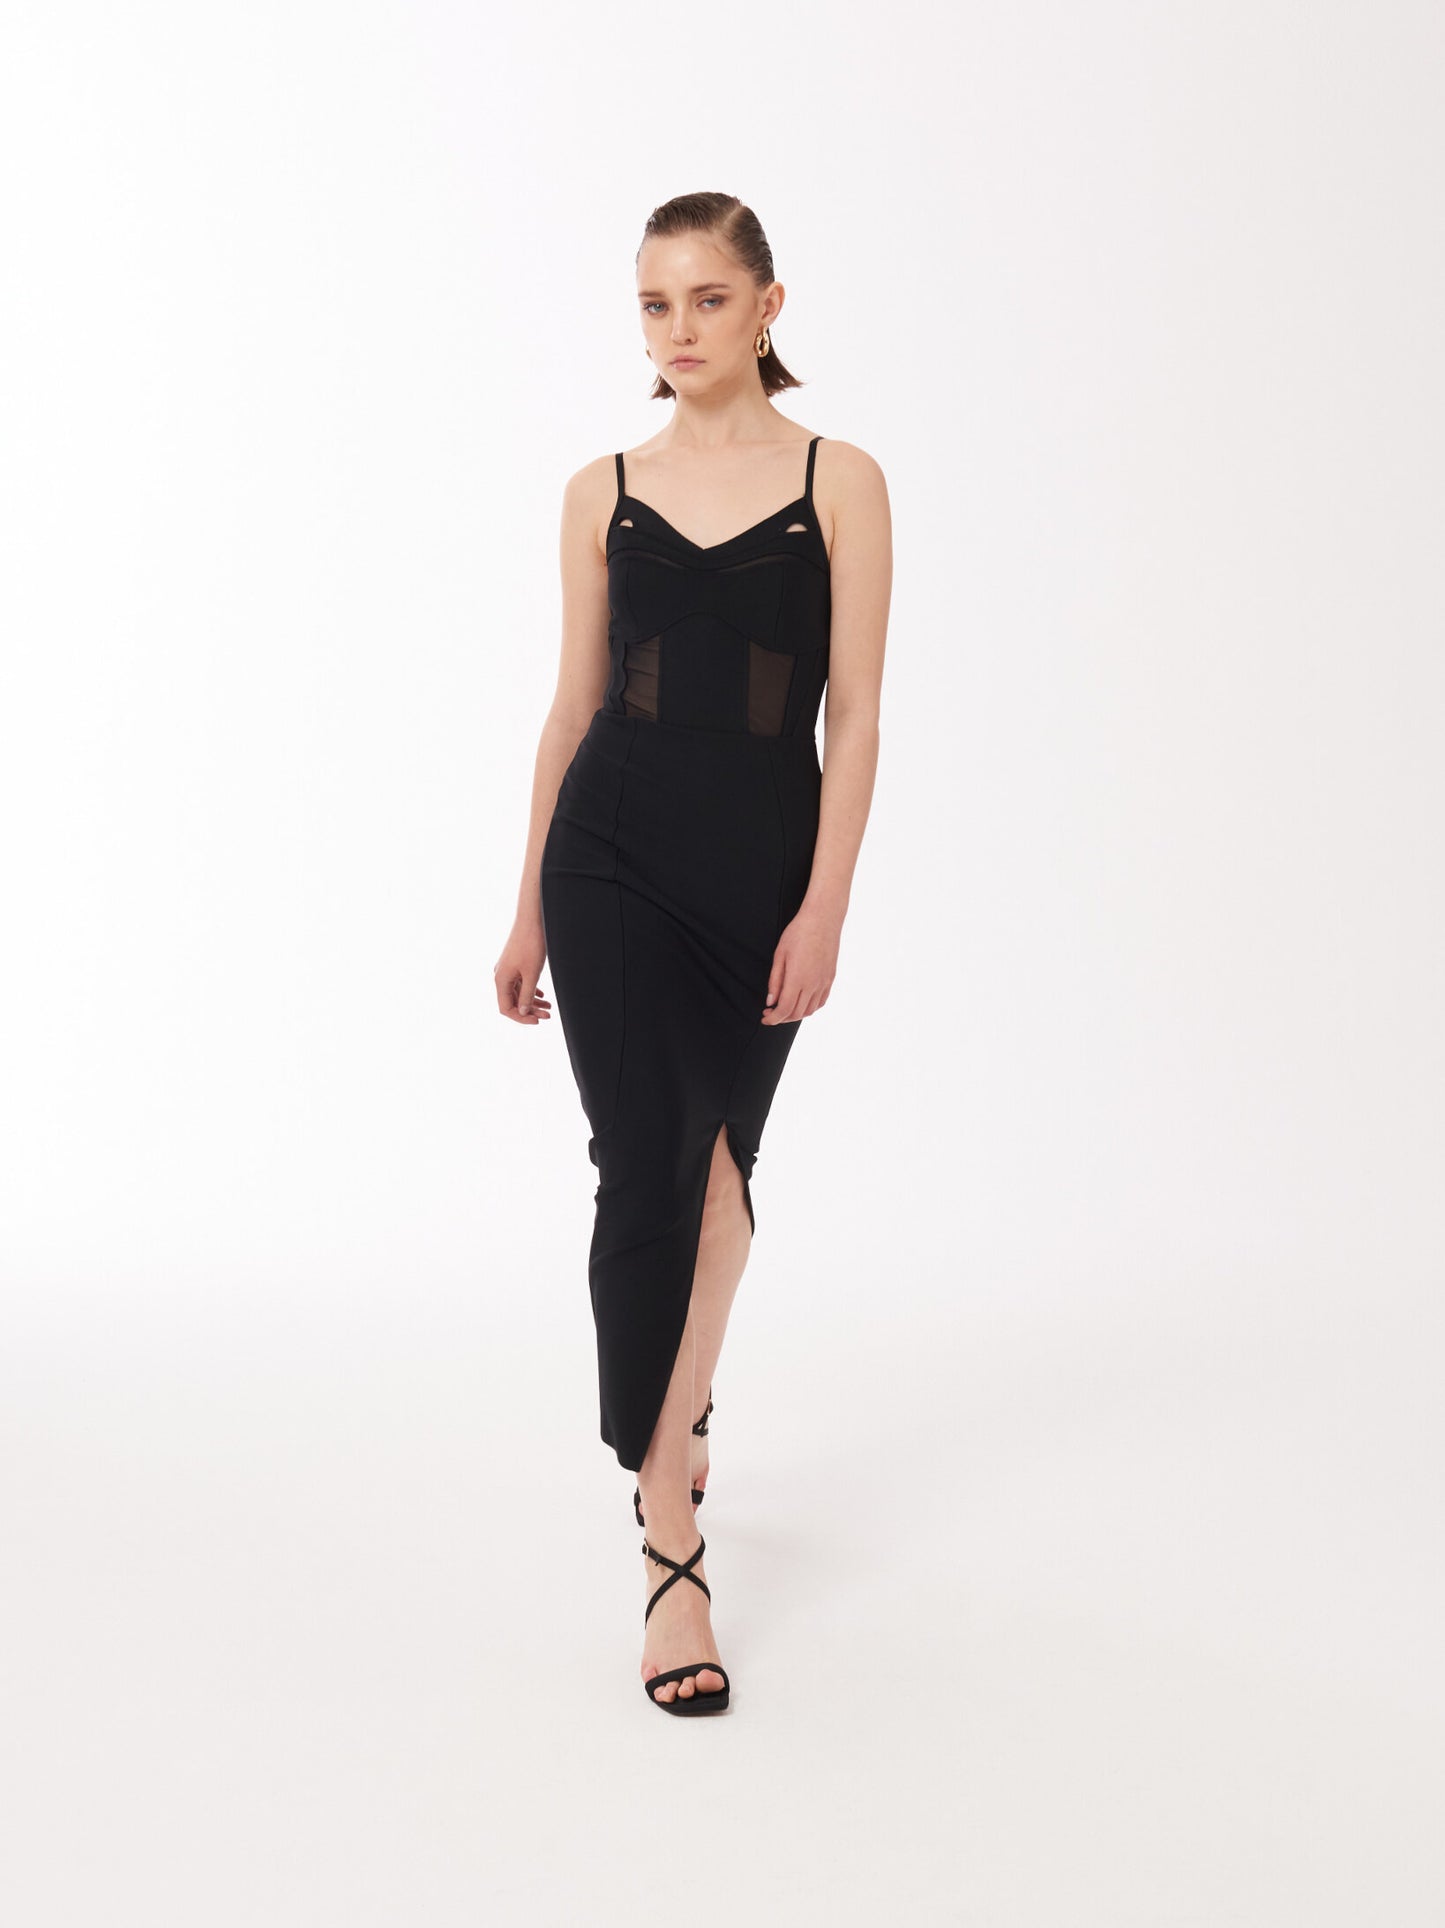 Bustier Tulle-paneled dress in black by Sour Figs